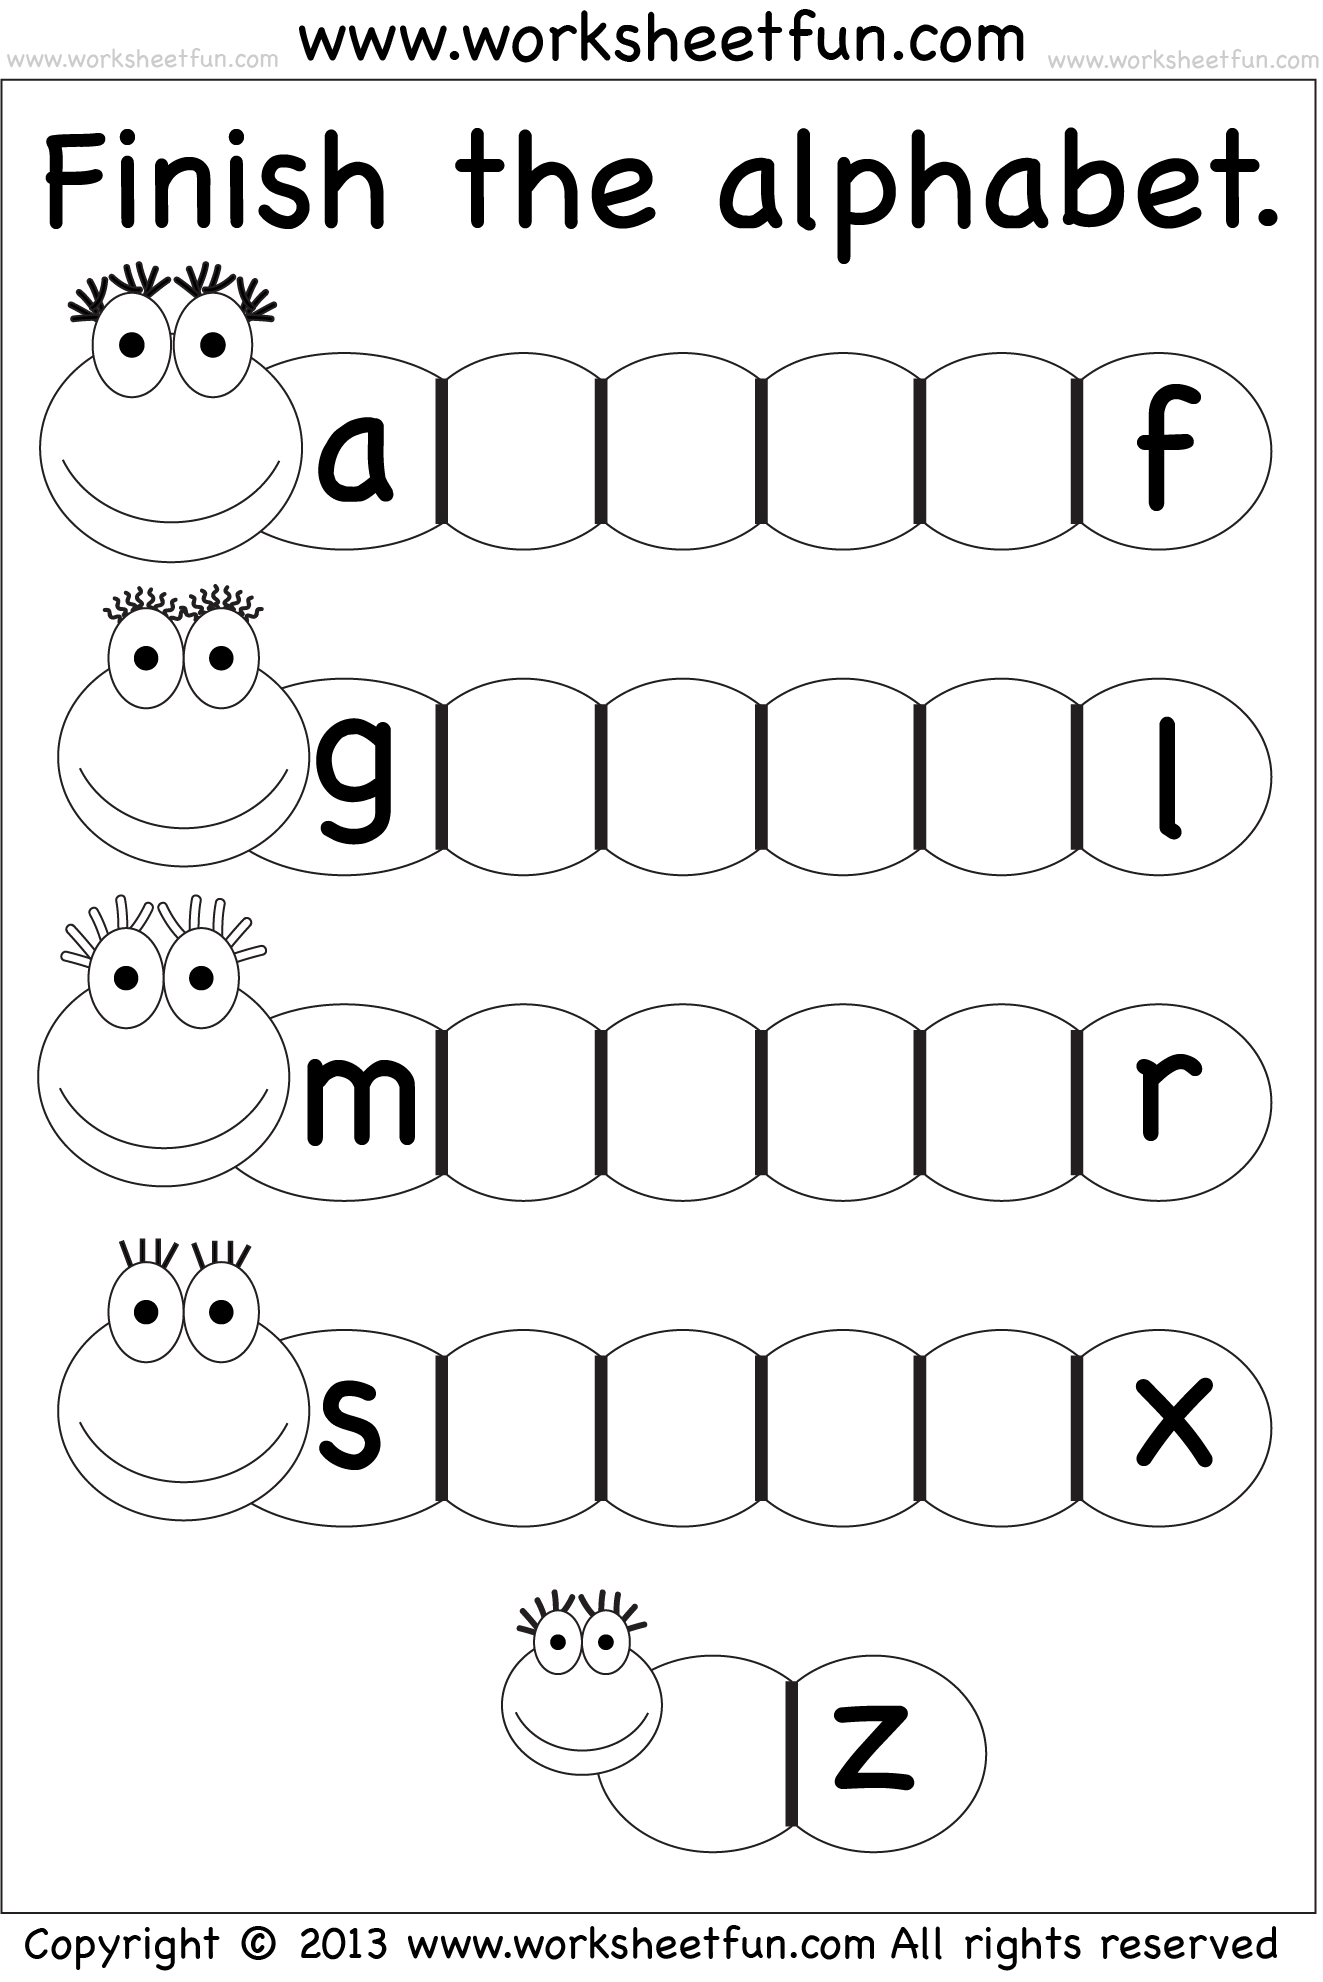 Missing Lowercase Letters – Missing Small Letters – Worksheet / FREE